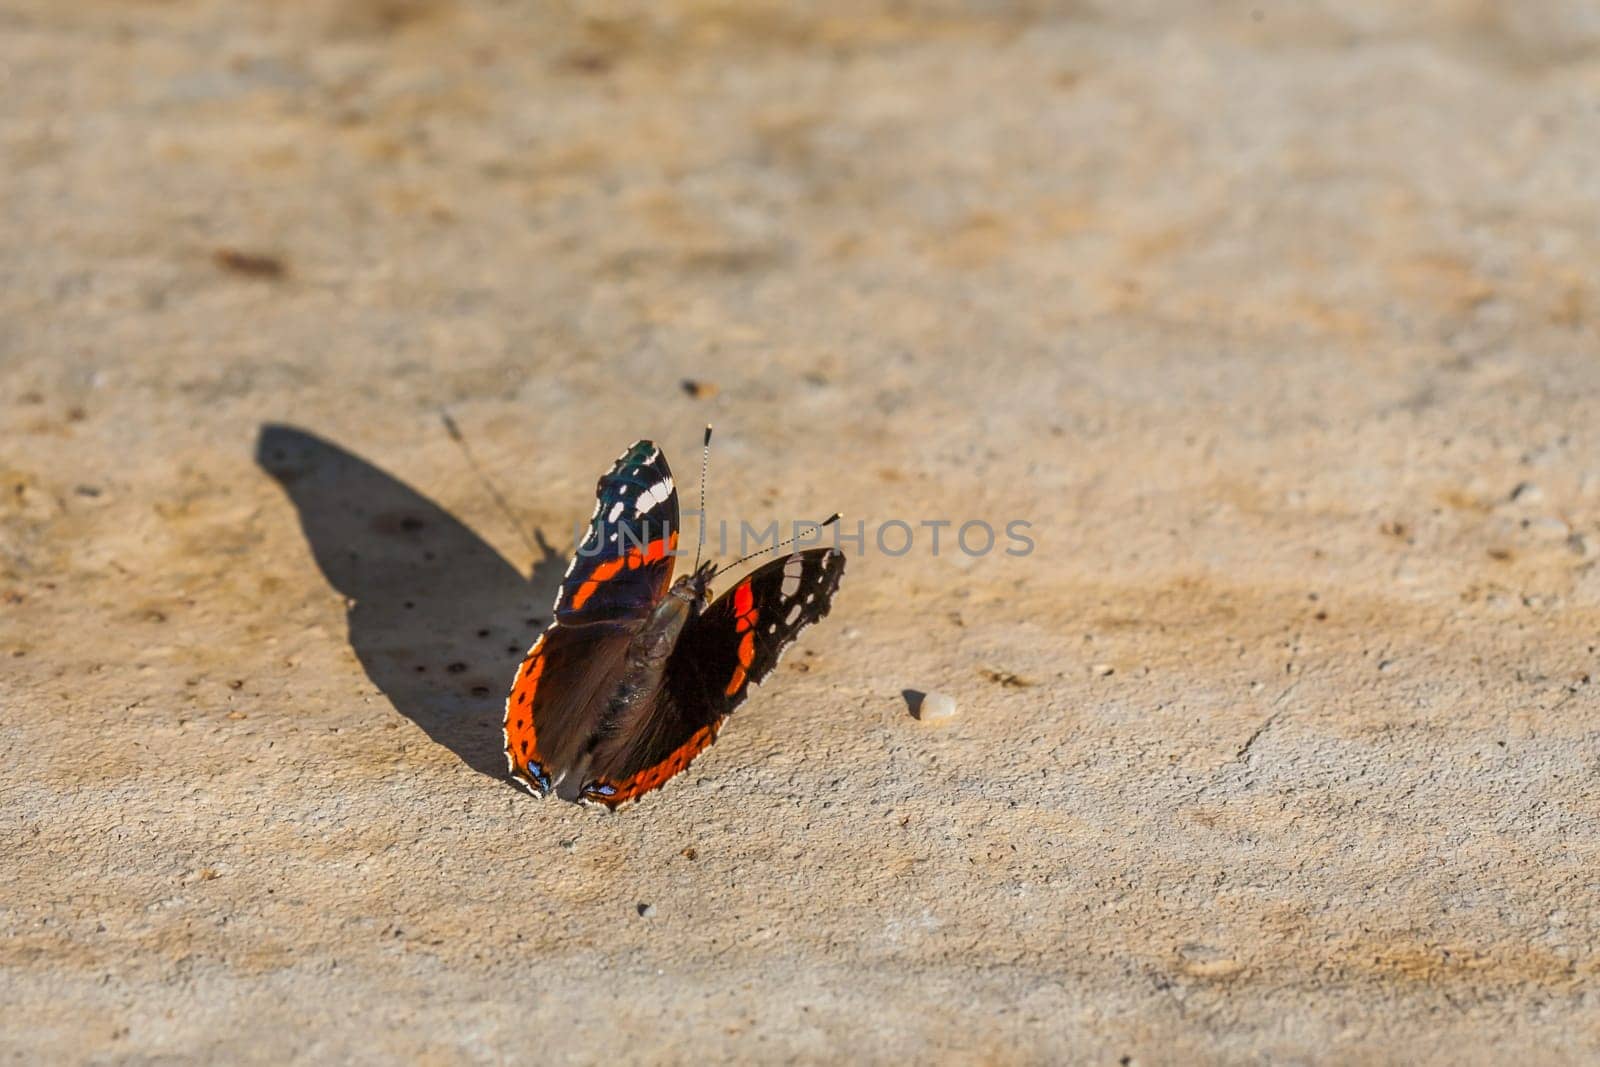 The image shows a butterfly with vibrant orange bands and white spots on black wings, resting on a sunlit stone. The close-up captures intricate details and textures, highlighting the beauty and fragility of nature.